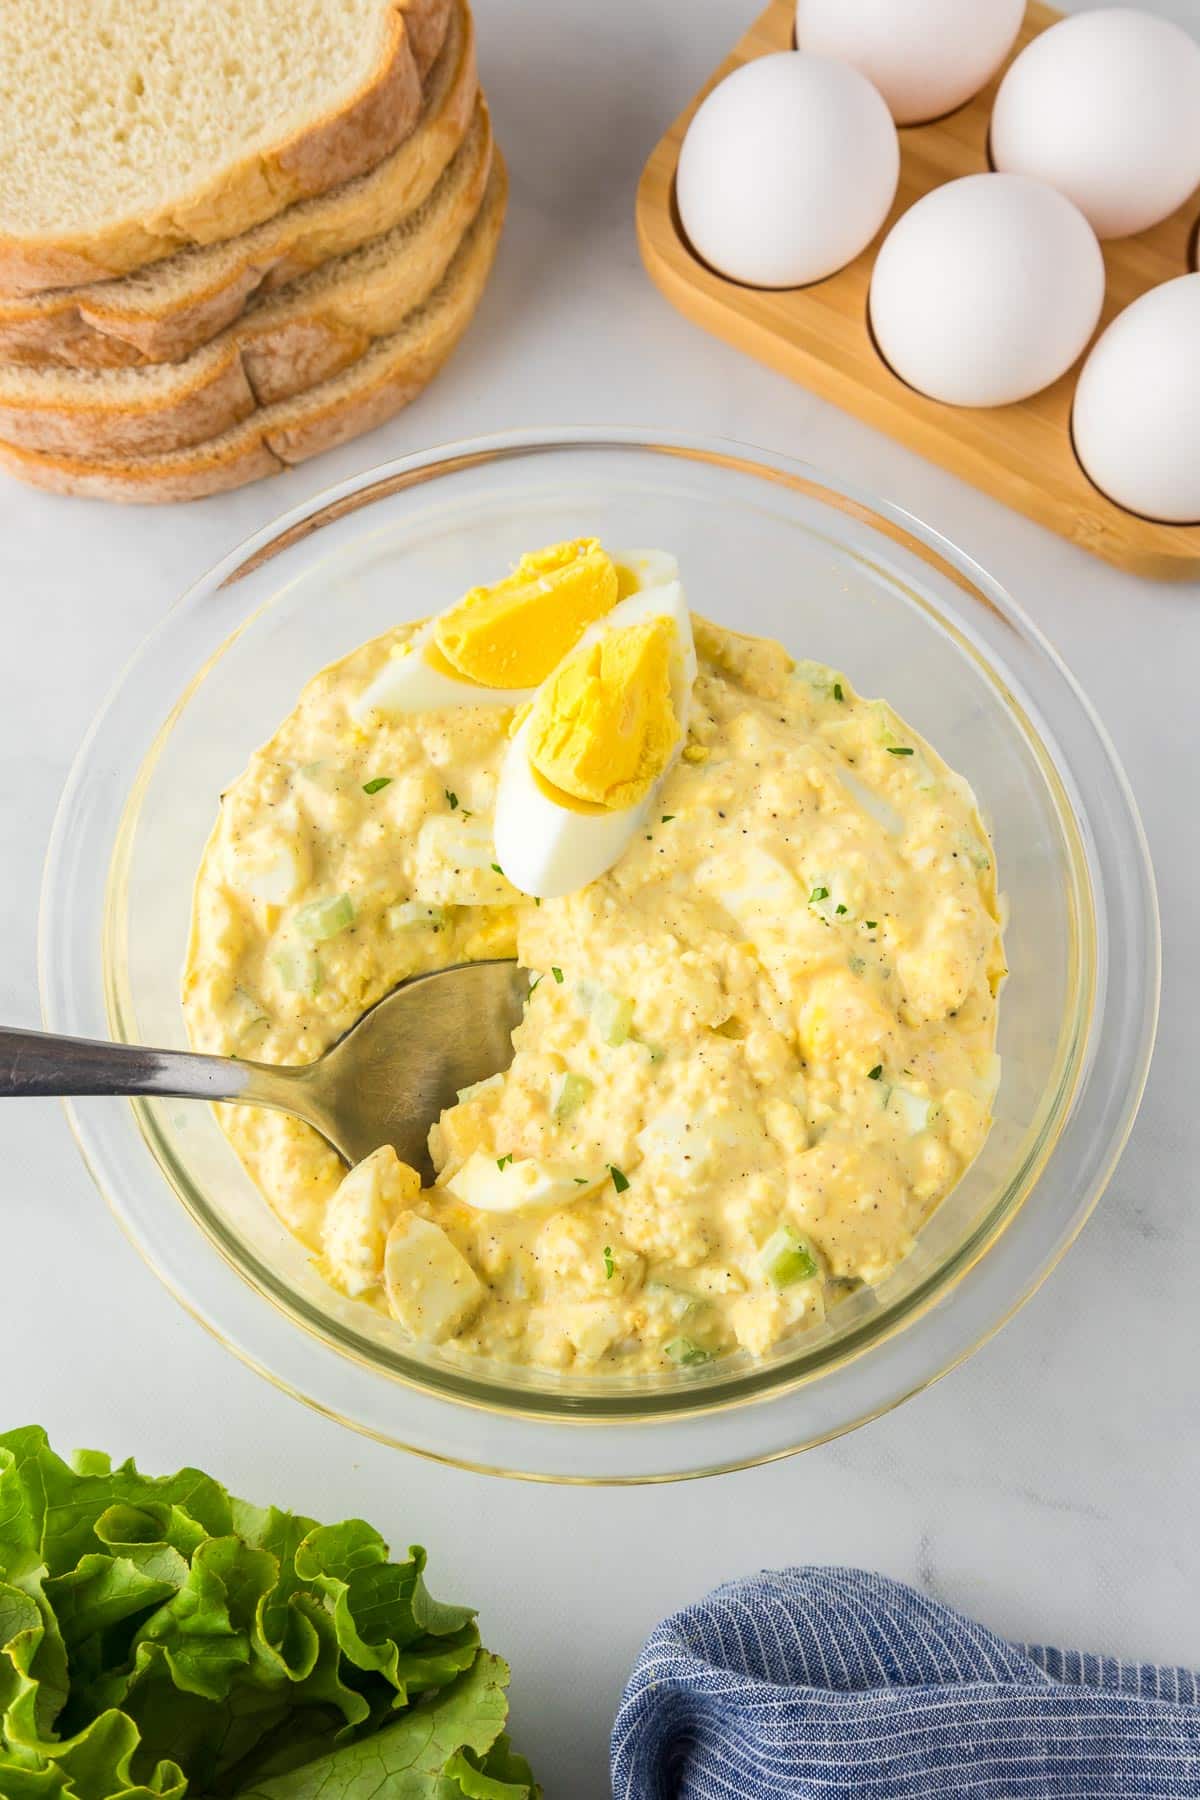 A bowl of egg salad with a spoon and bread and lettuce nearby to make sandwiches.